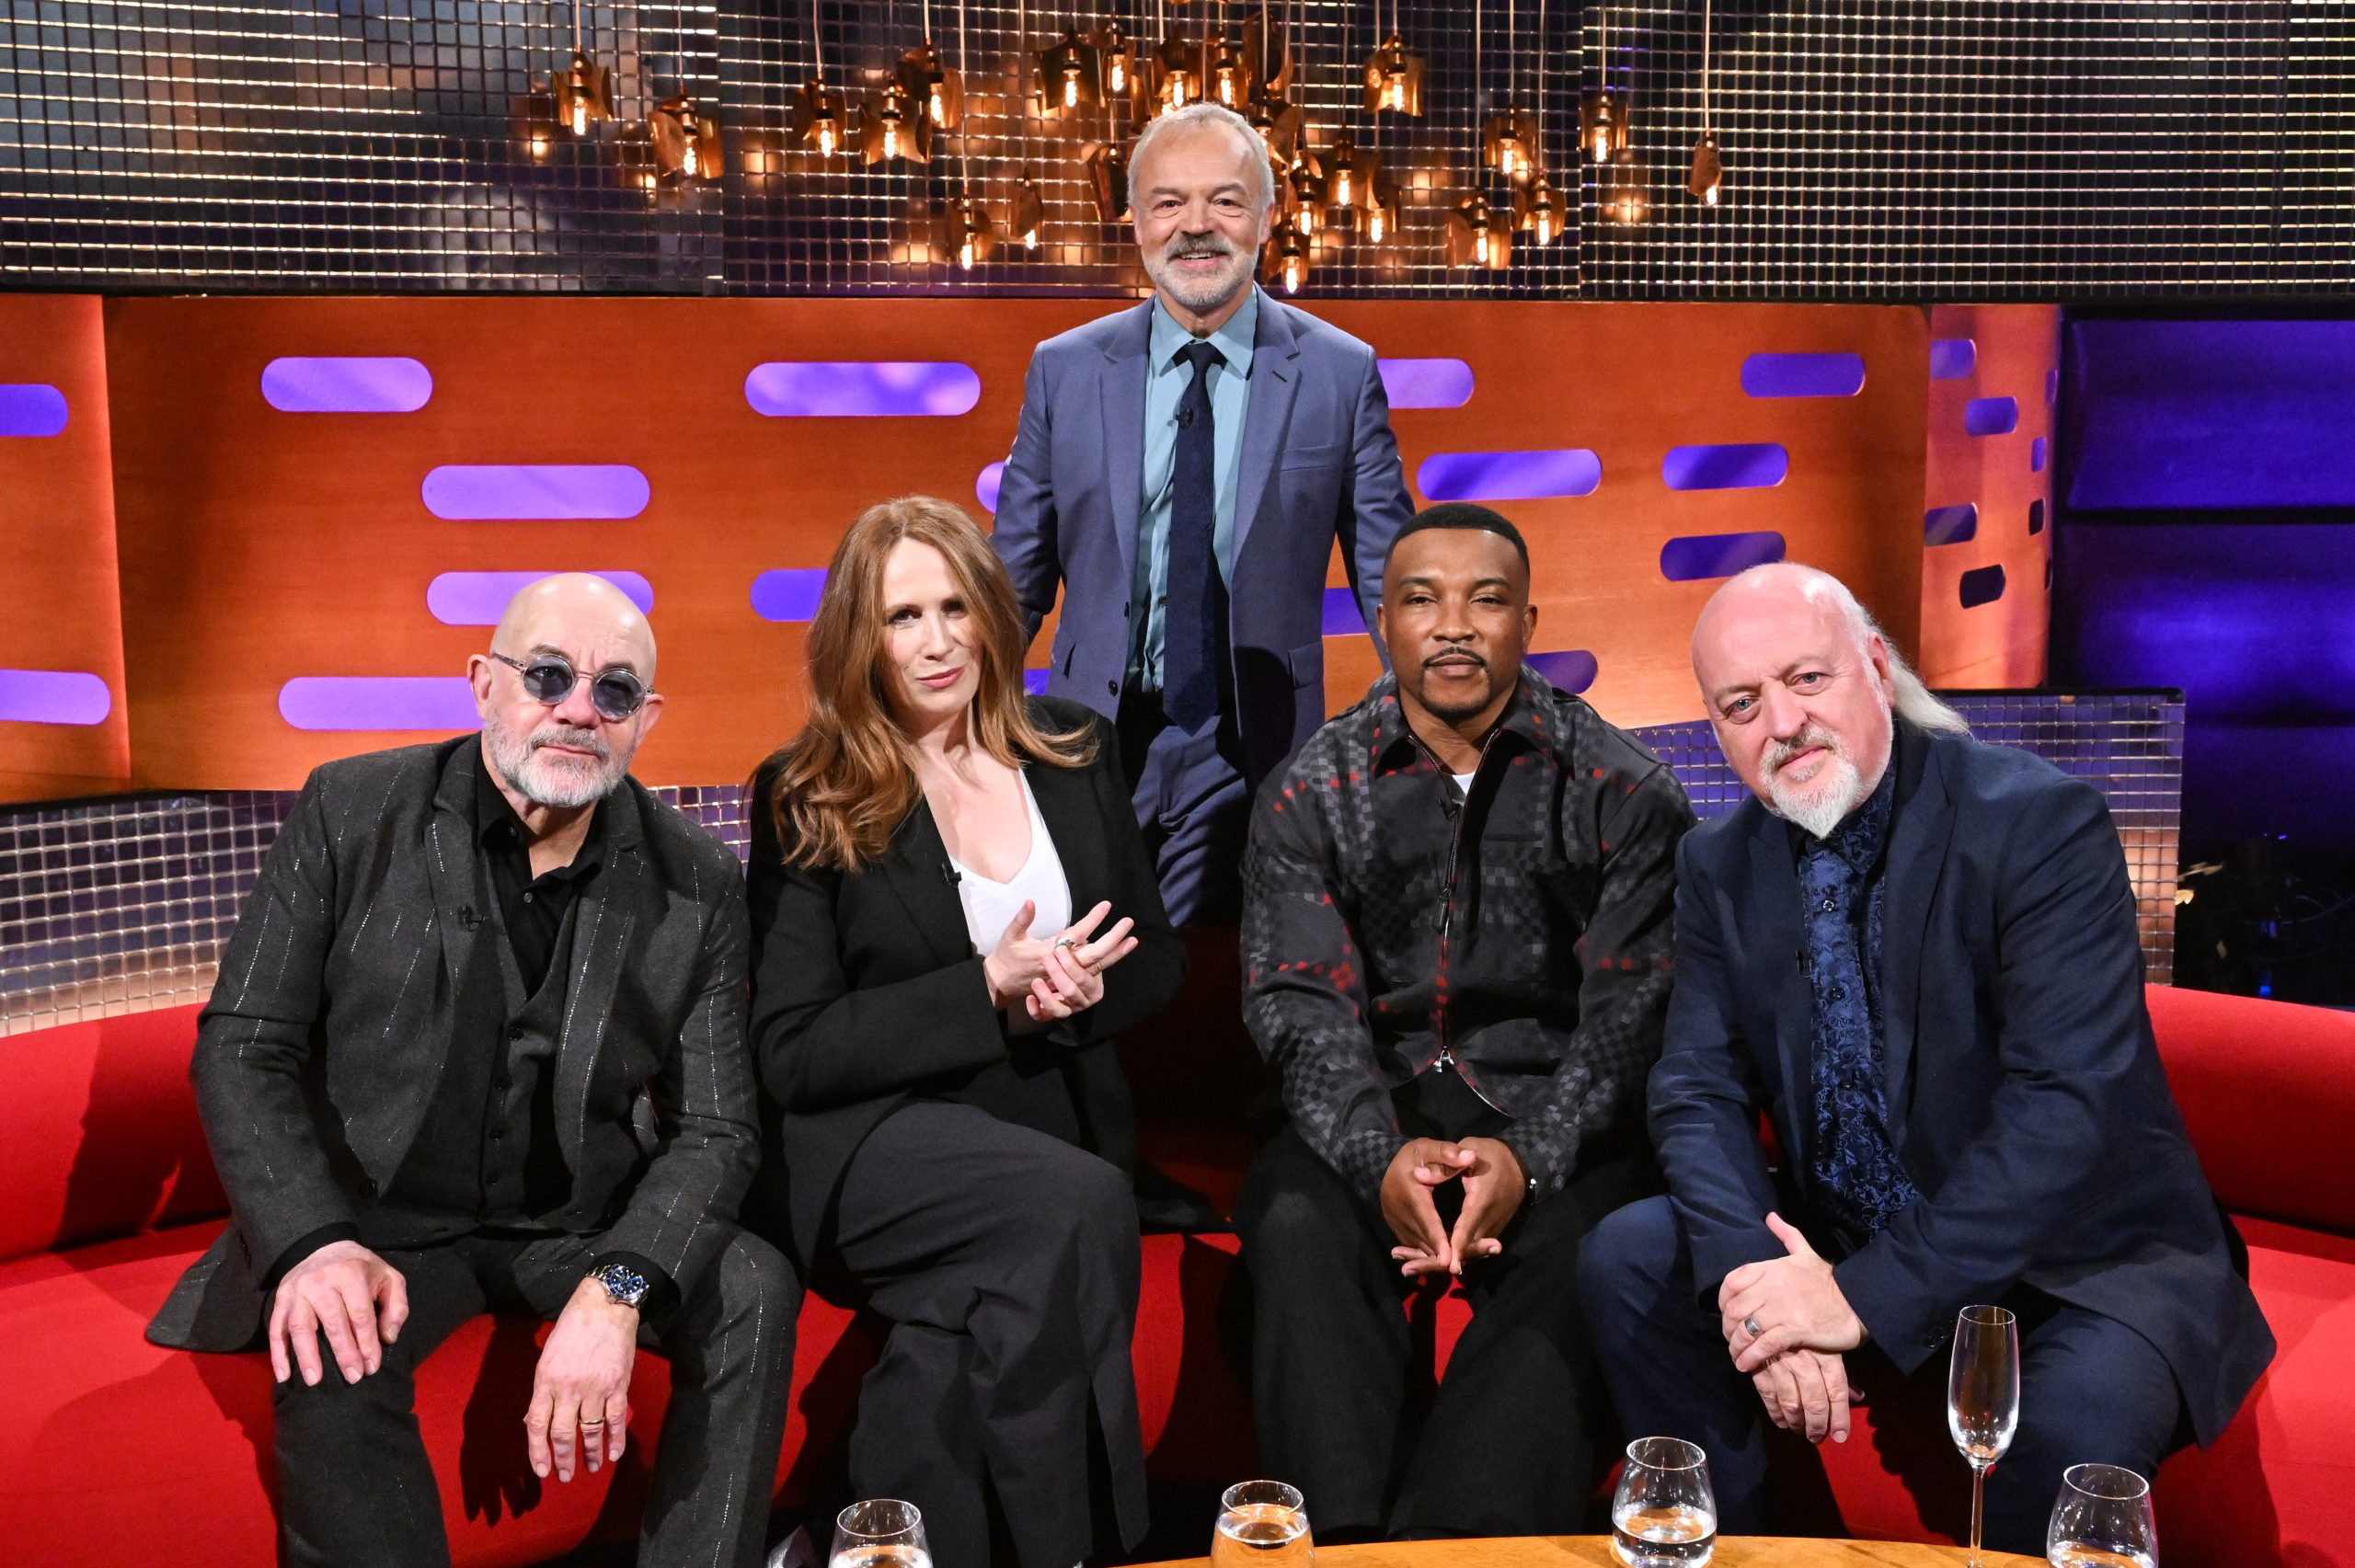 Graham Norton meets Bernie Taupin, Catherine Tate, Ashley Walters, Bill Bailey and Christine and The Queens